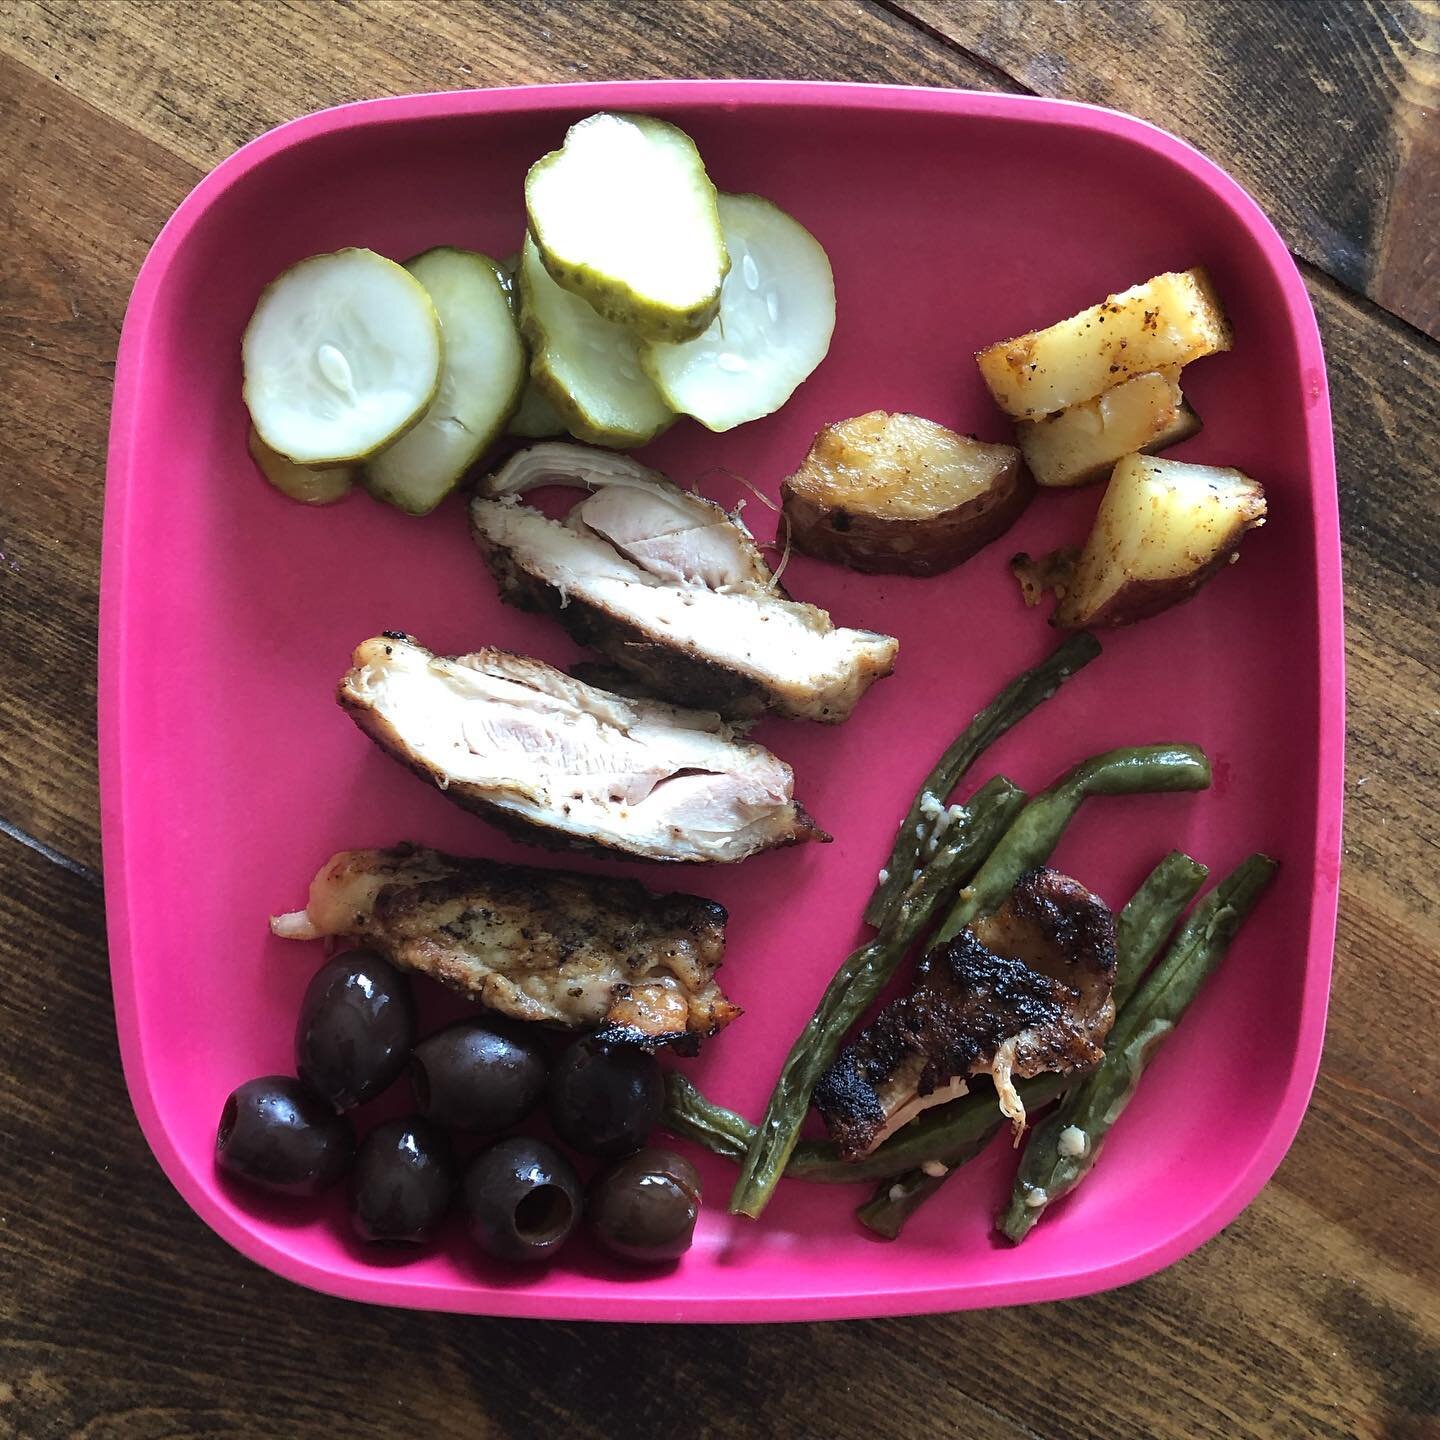 I brought snacks to the park today (meat sticks, carrots, and peppers), and then we came home for a hot lunch of leftovers:
- chicken thigh strips
- roasted green beans 
- roasted potatoes 
- pickles
- olives 
.
With the exception of the potatoes, th